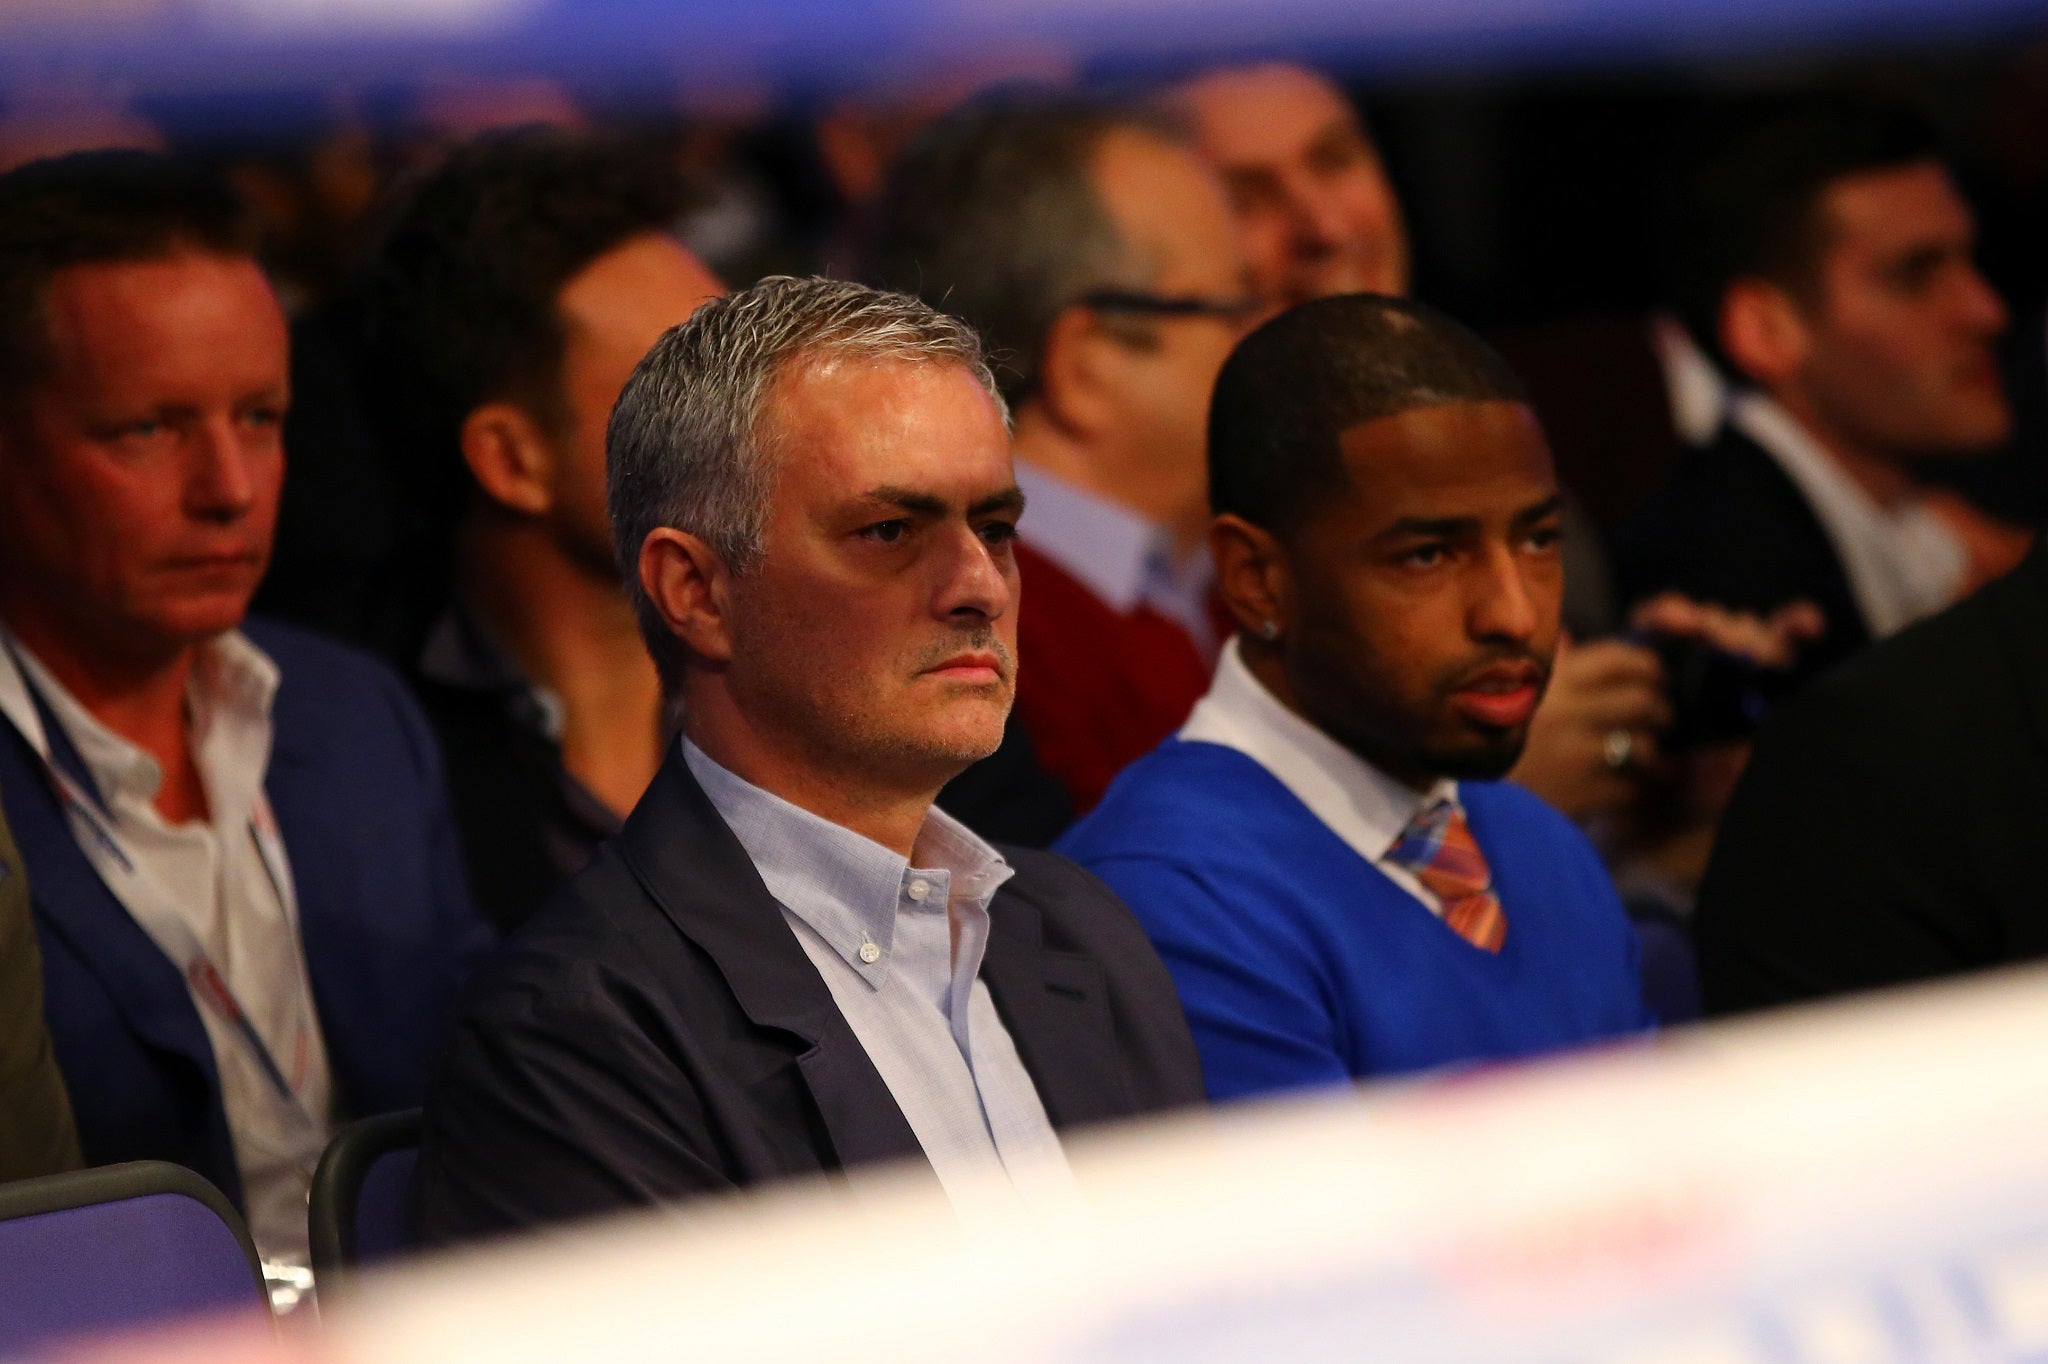 Former Chelsea manager Jose Mourinho watches on at ringside